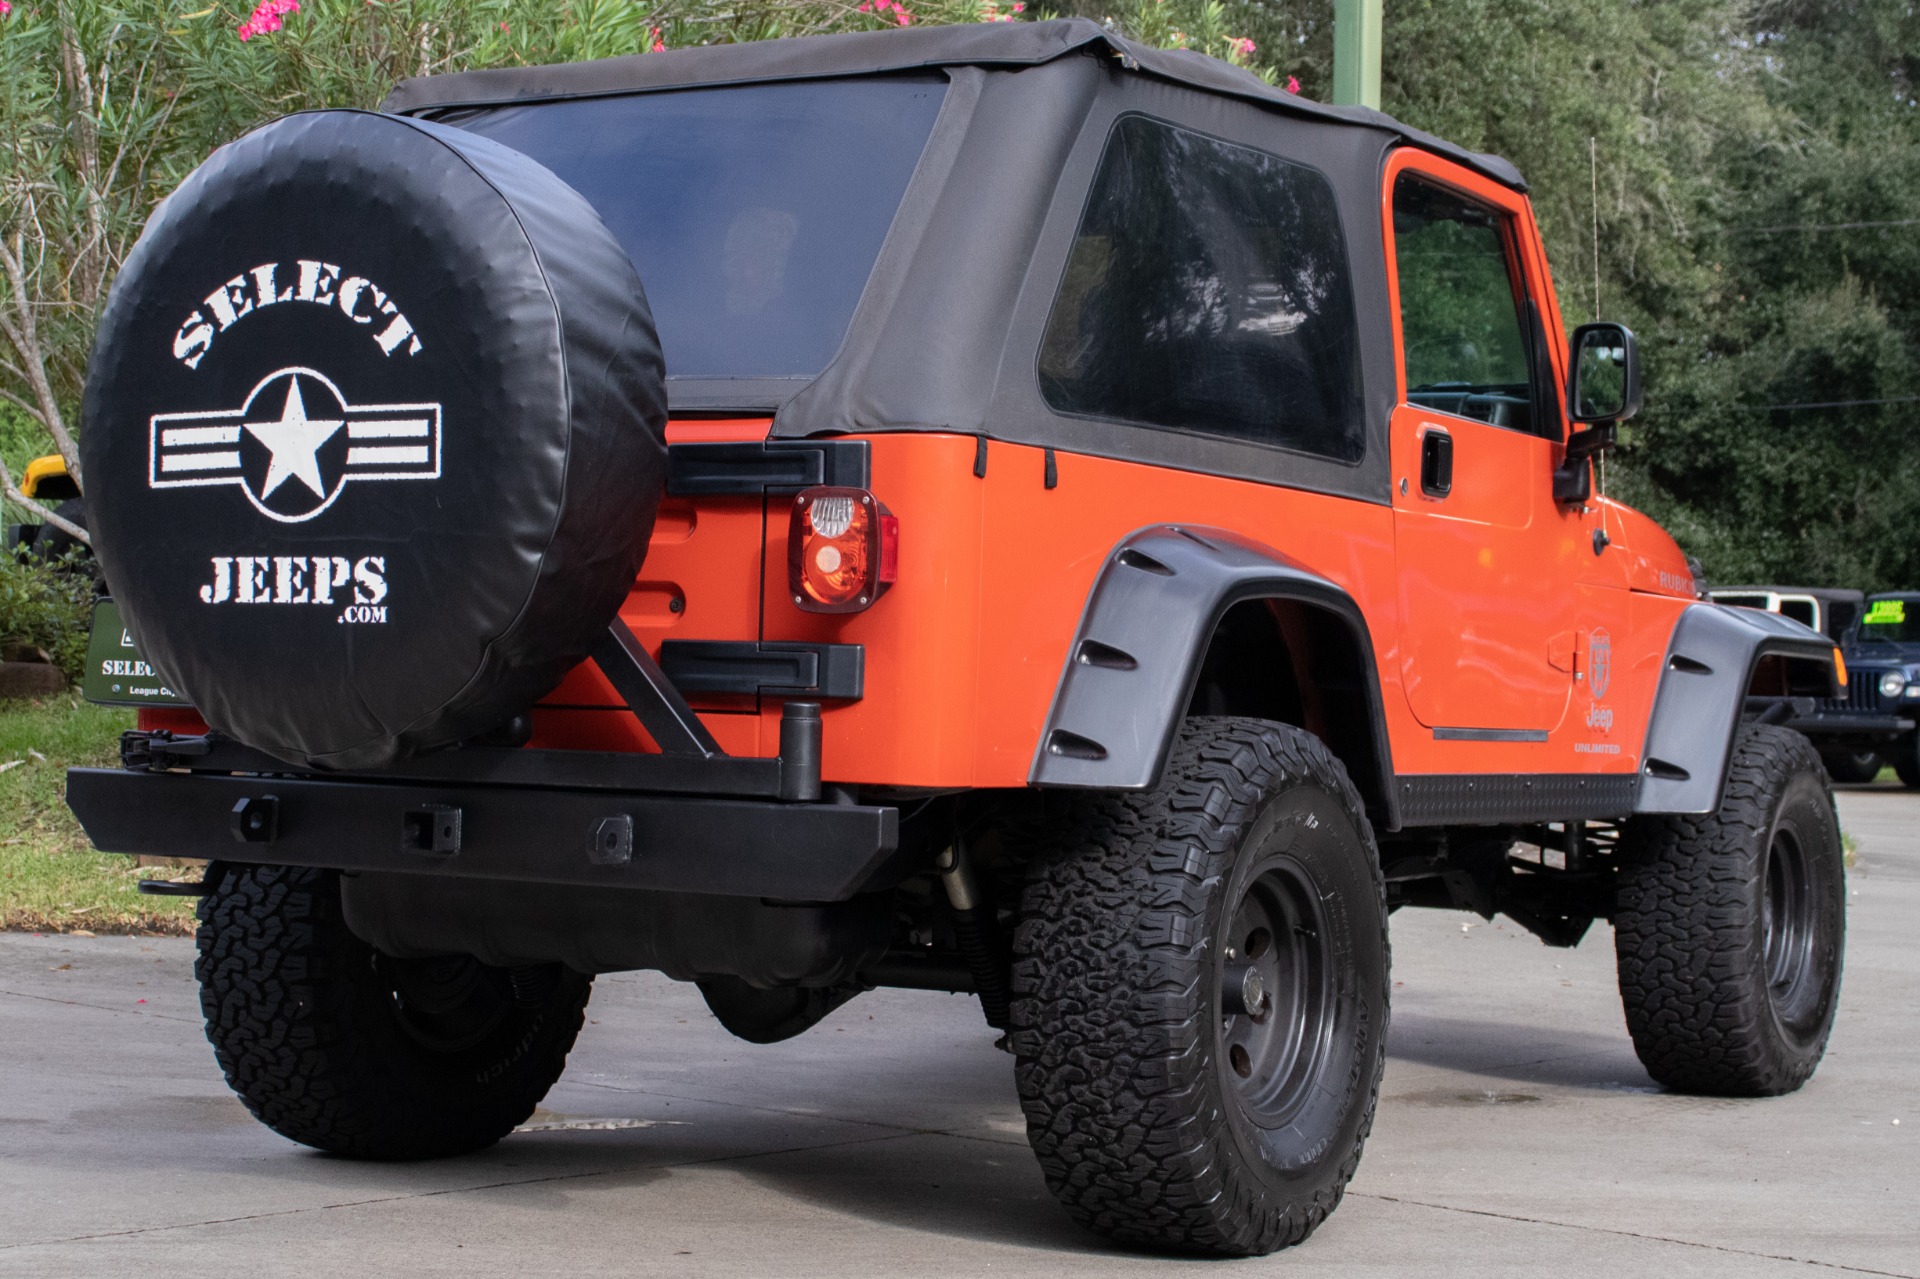 Used 2006 Jeep Wrangler Unlimited Rubicon For Sale ($29,995) | Select Jeeps  Inc. Stock #763822